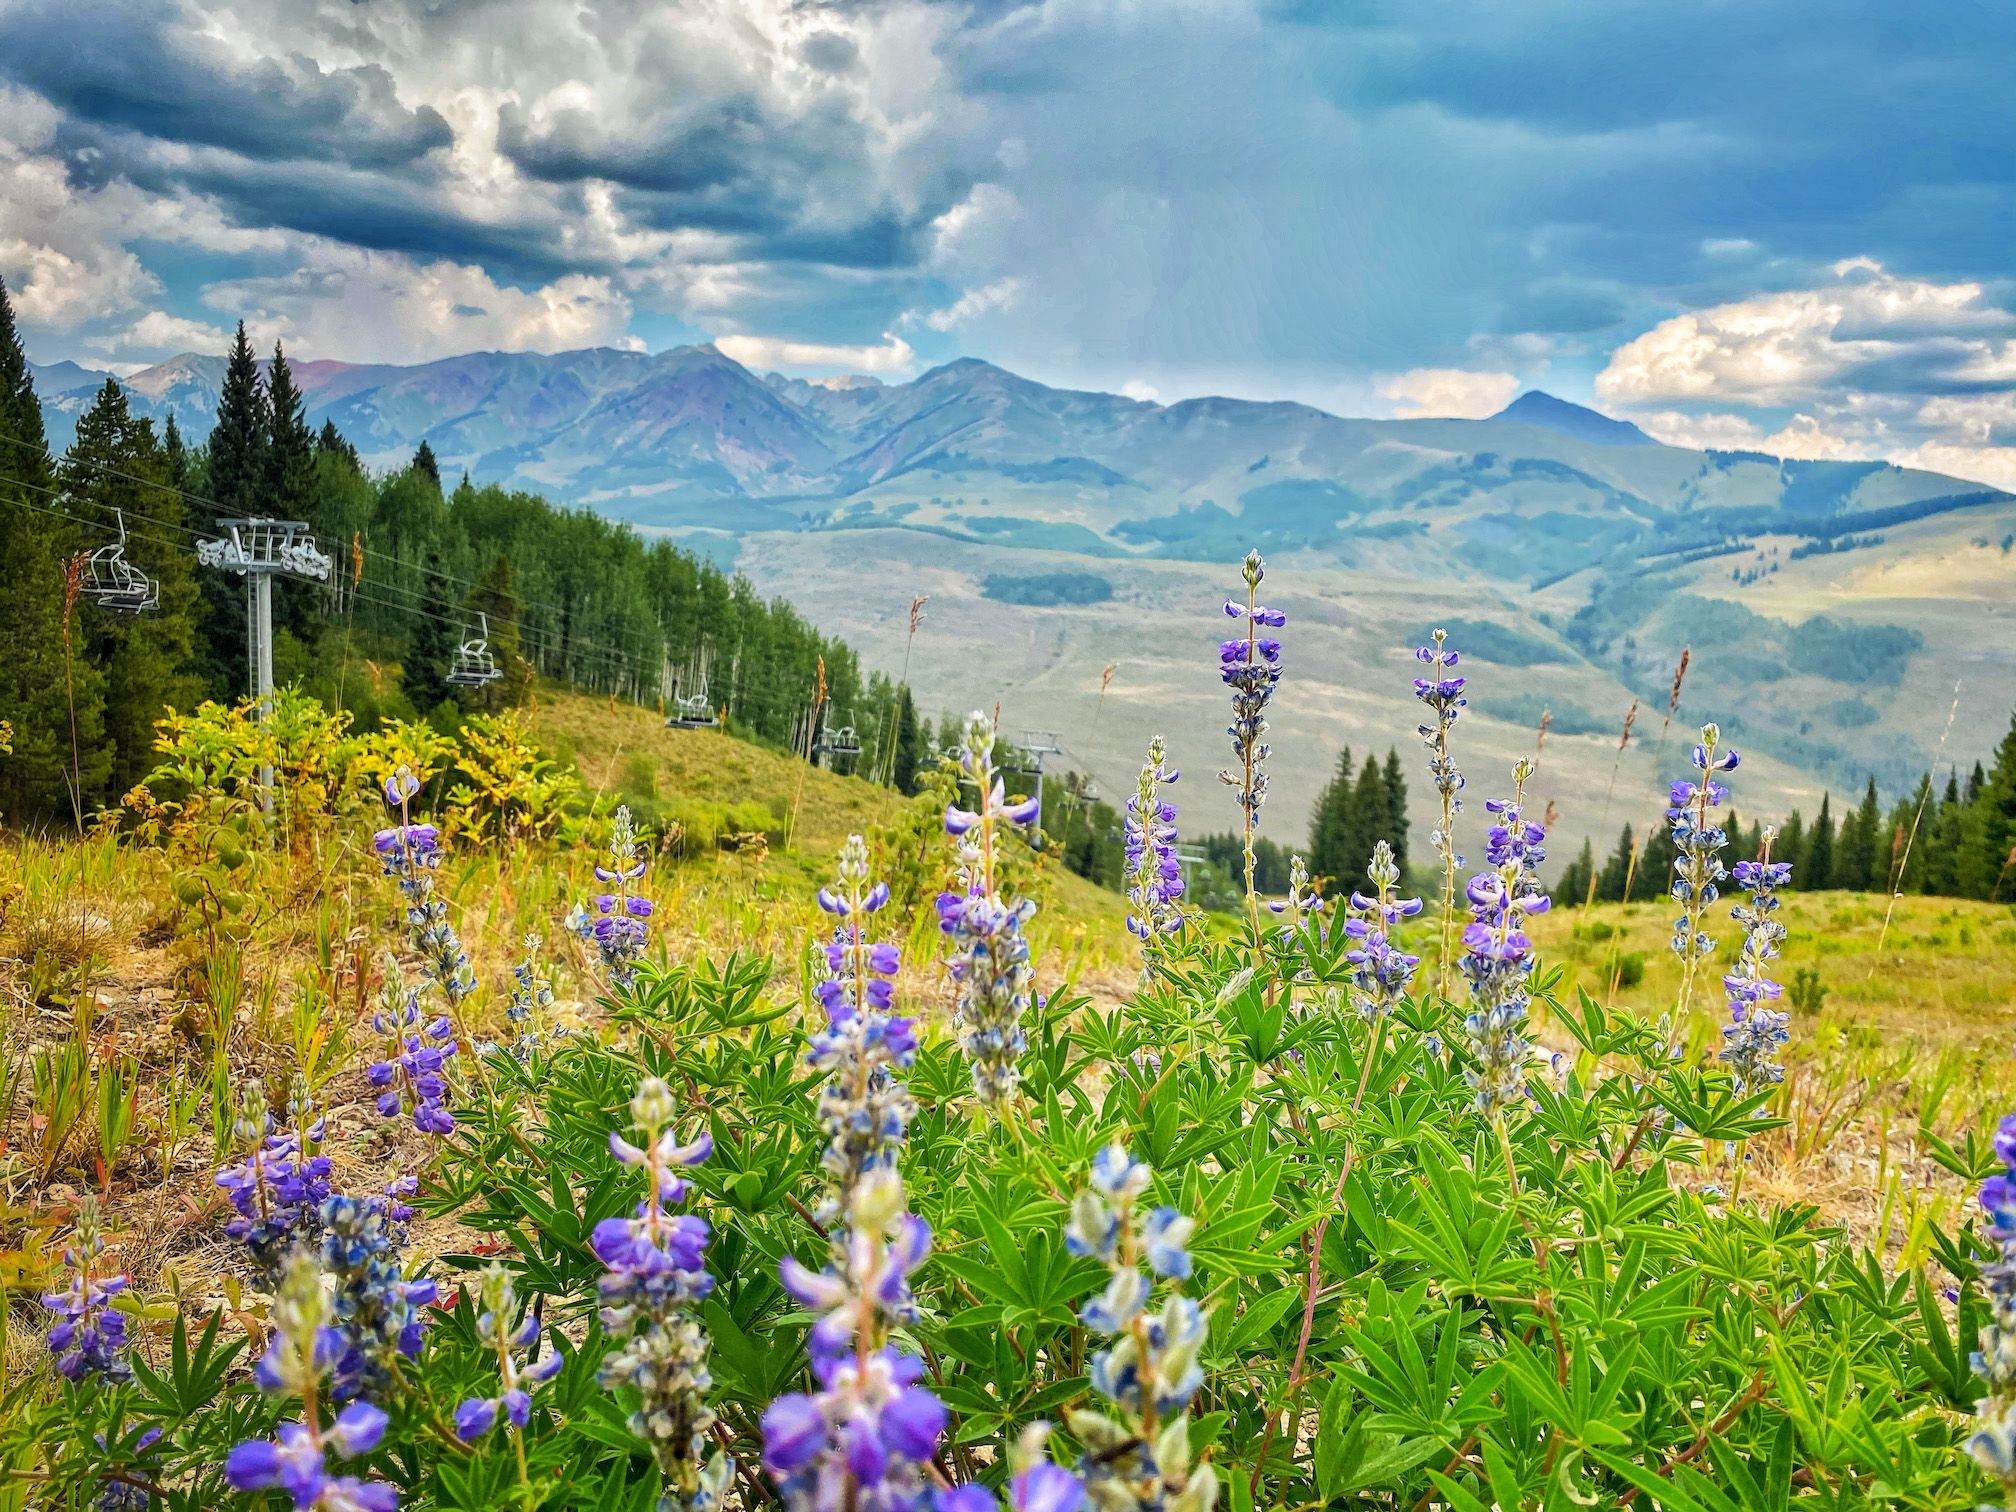 A cluster of wildflowers is in the foreground of the picture. There is a chairlift and mountain peaks in the background